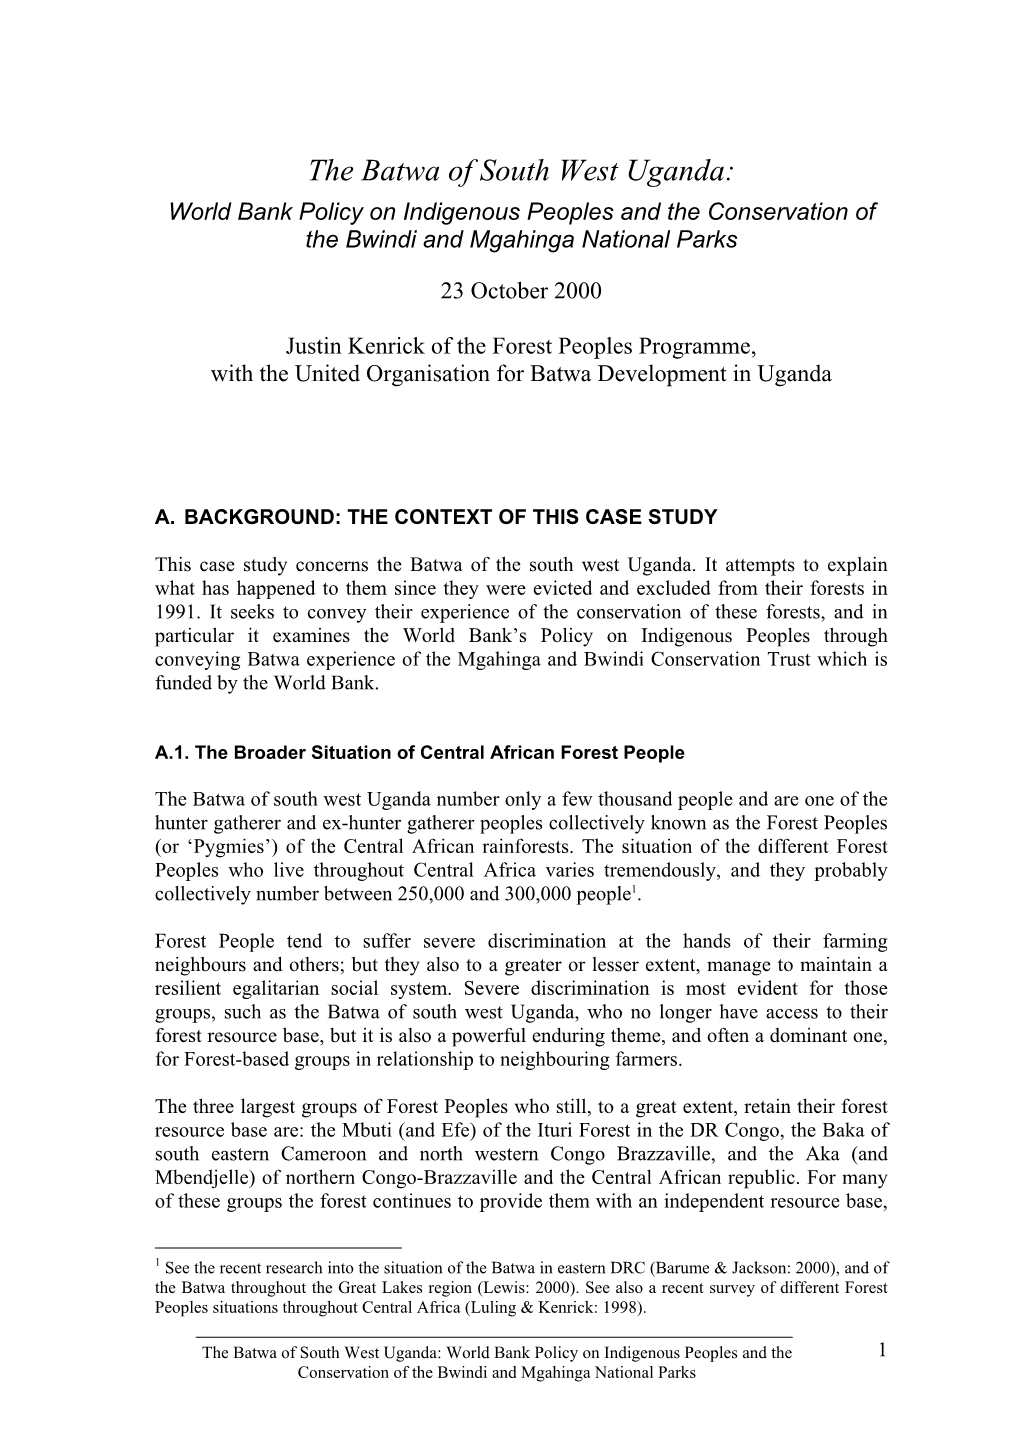 The Batwa of South West Uganda: World Bank Policy on Indigenous Peoples and the Conservation of the Bwindi and Mgahinga National Parks